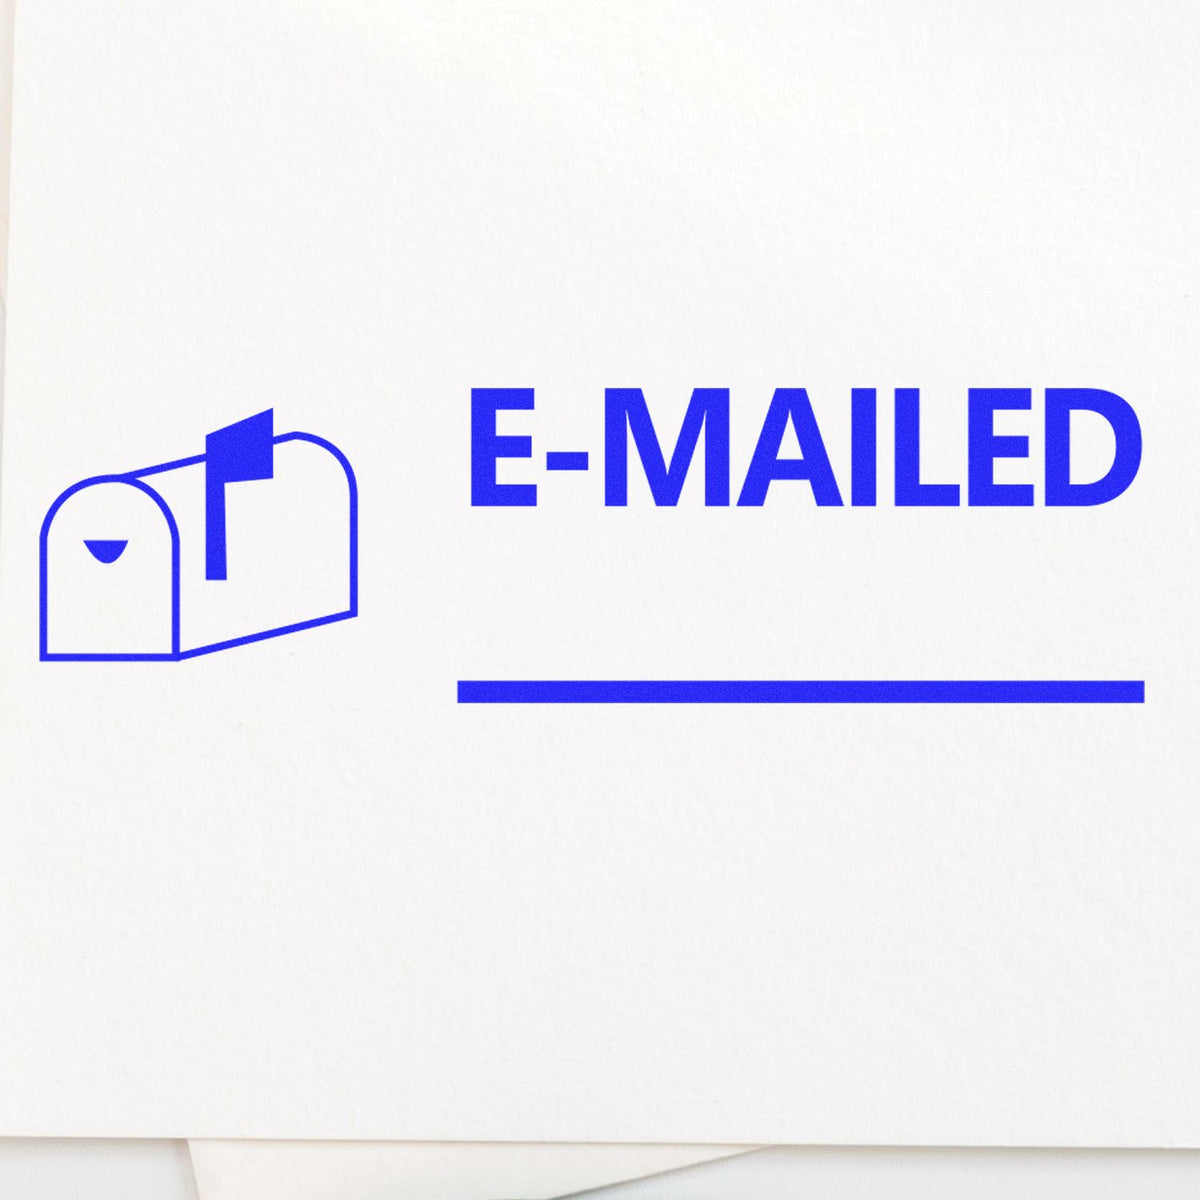 Large Emailed with Mailbox Rubber Stamp In Use Photo